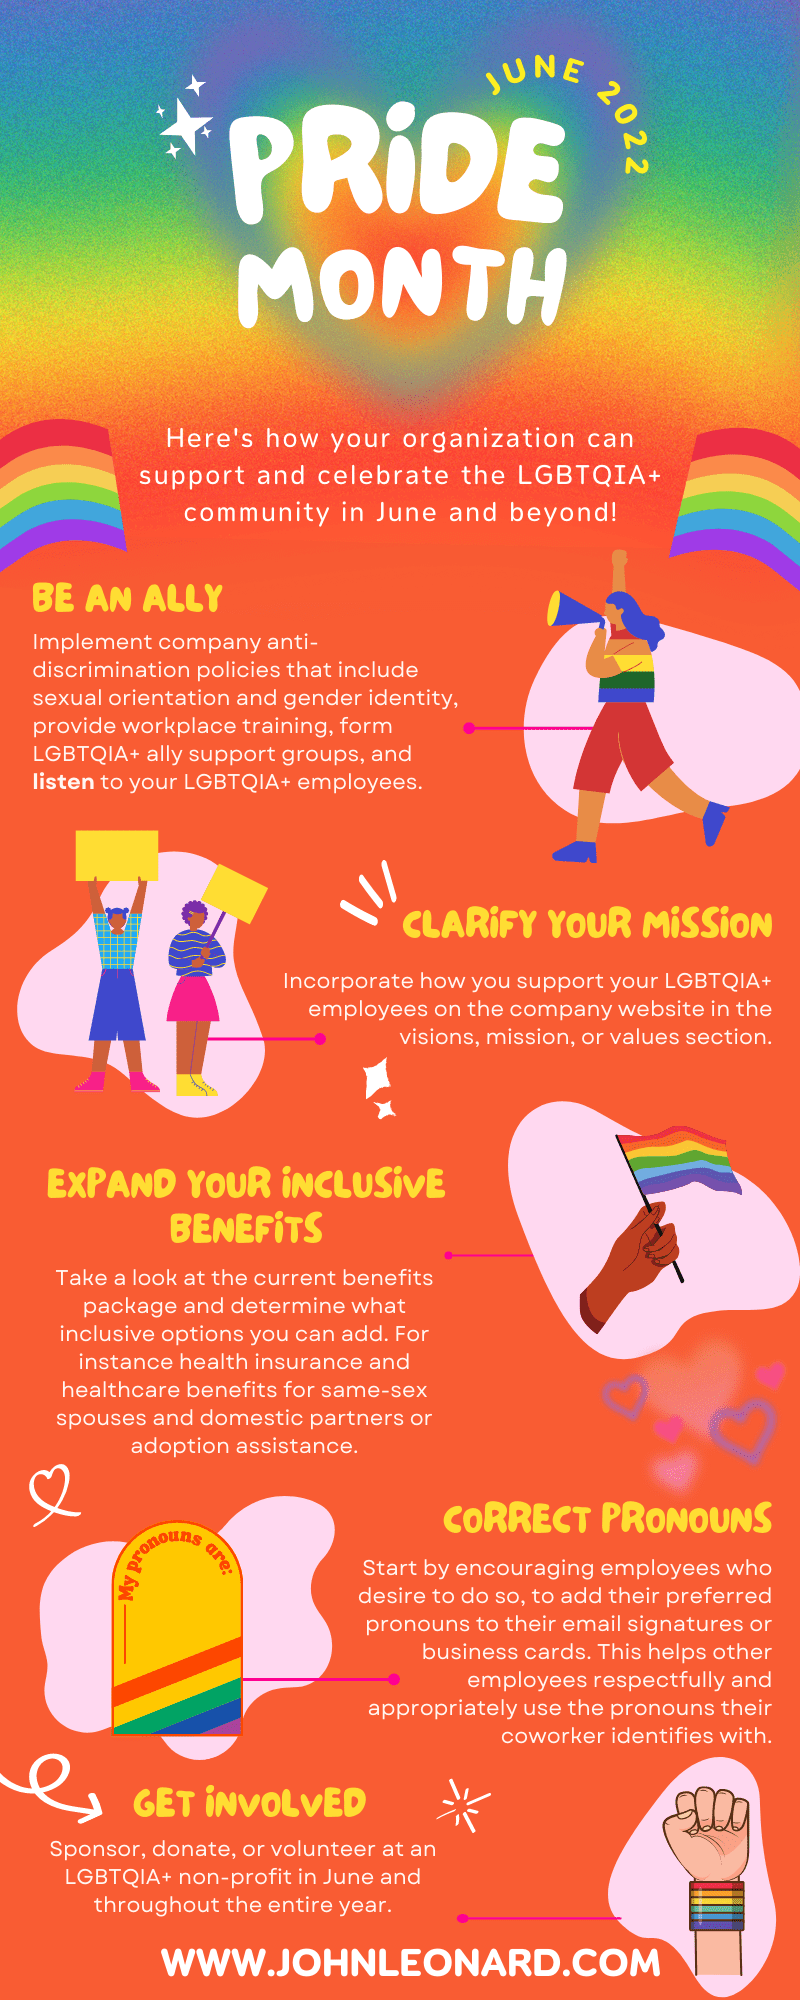 Pride Month 2022 Infographic